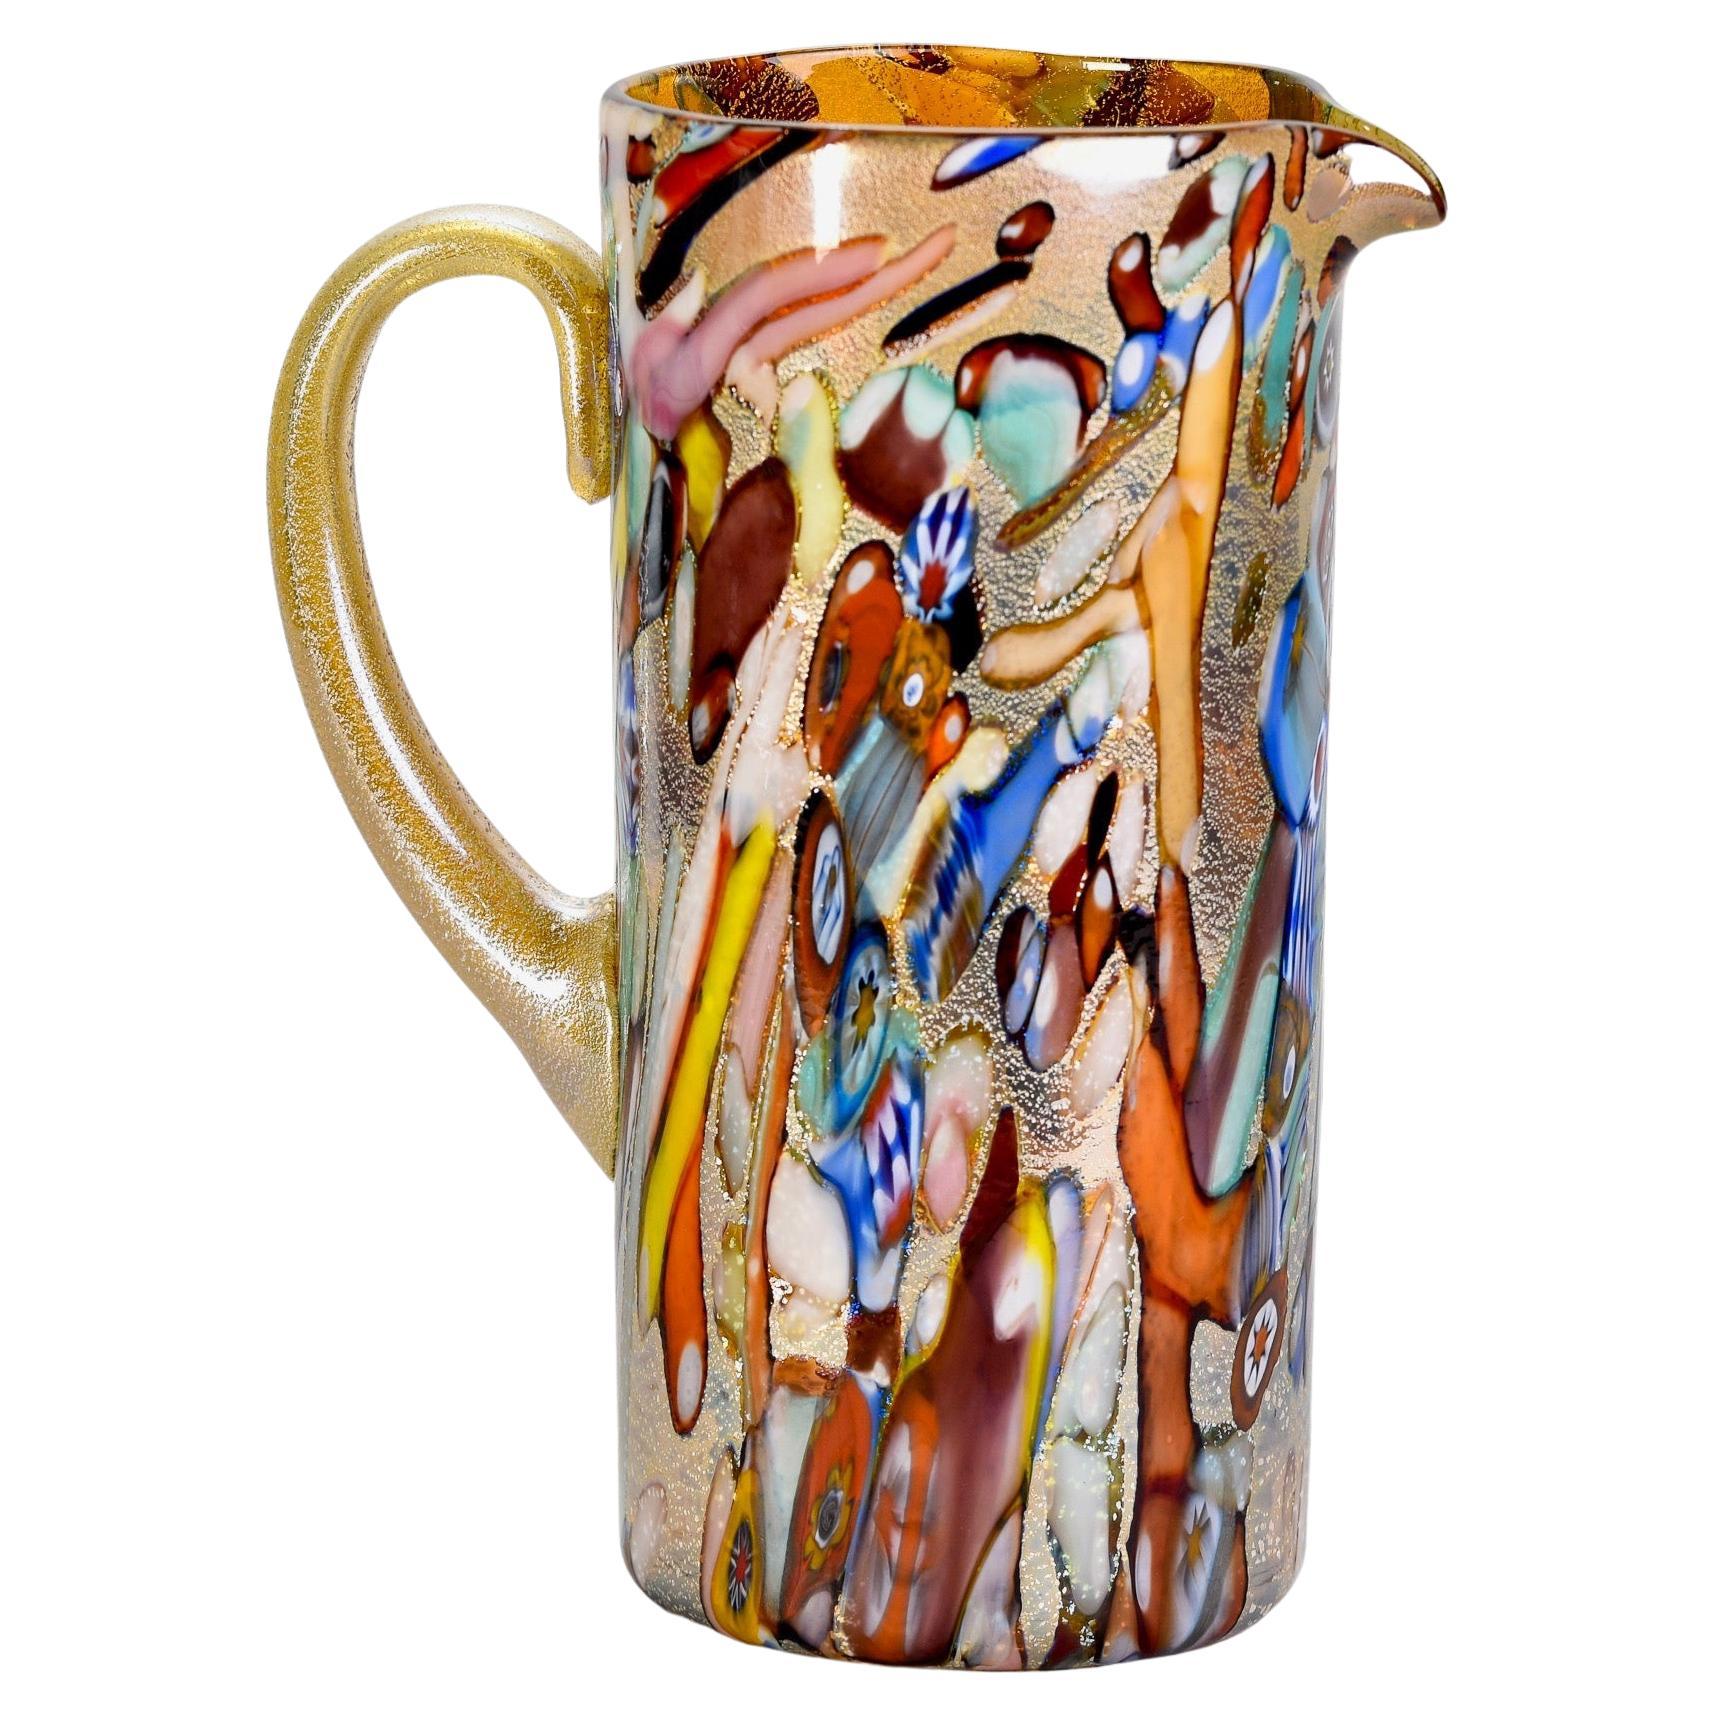 New Murano Glass Pitcher in Gold with Multiple Colors